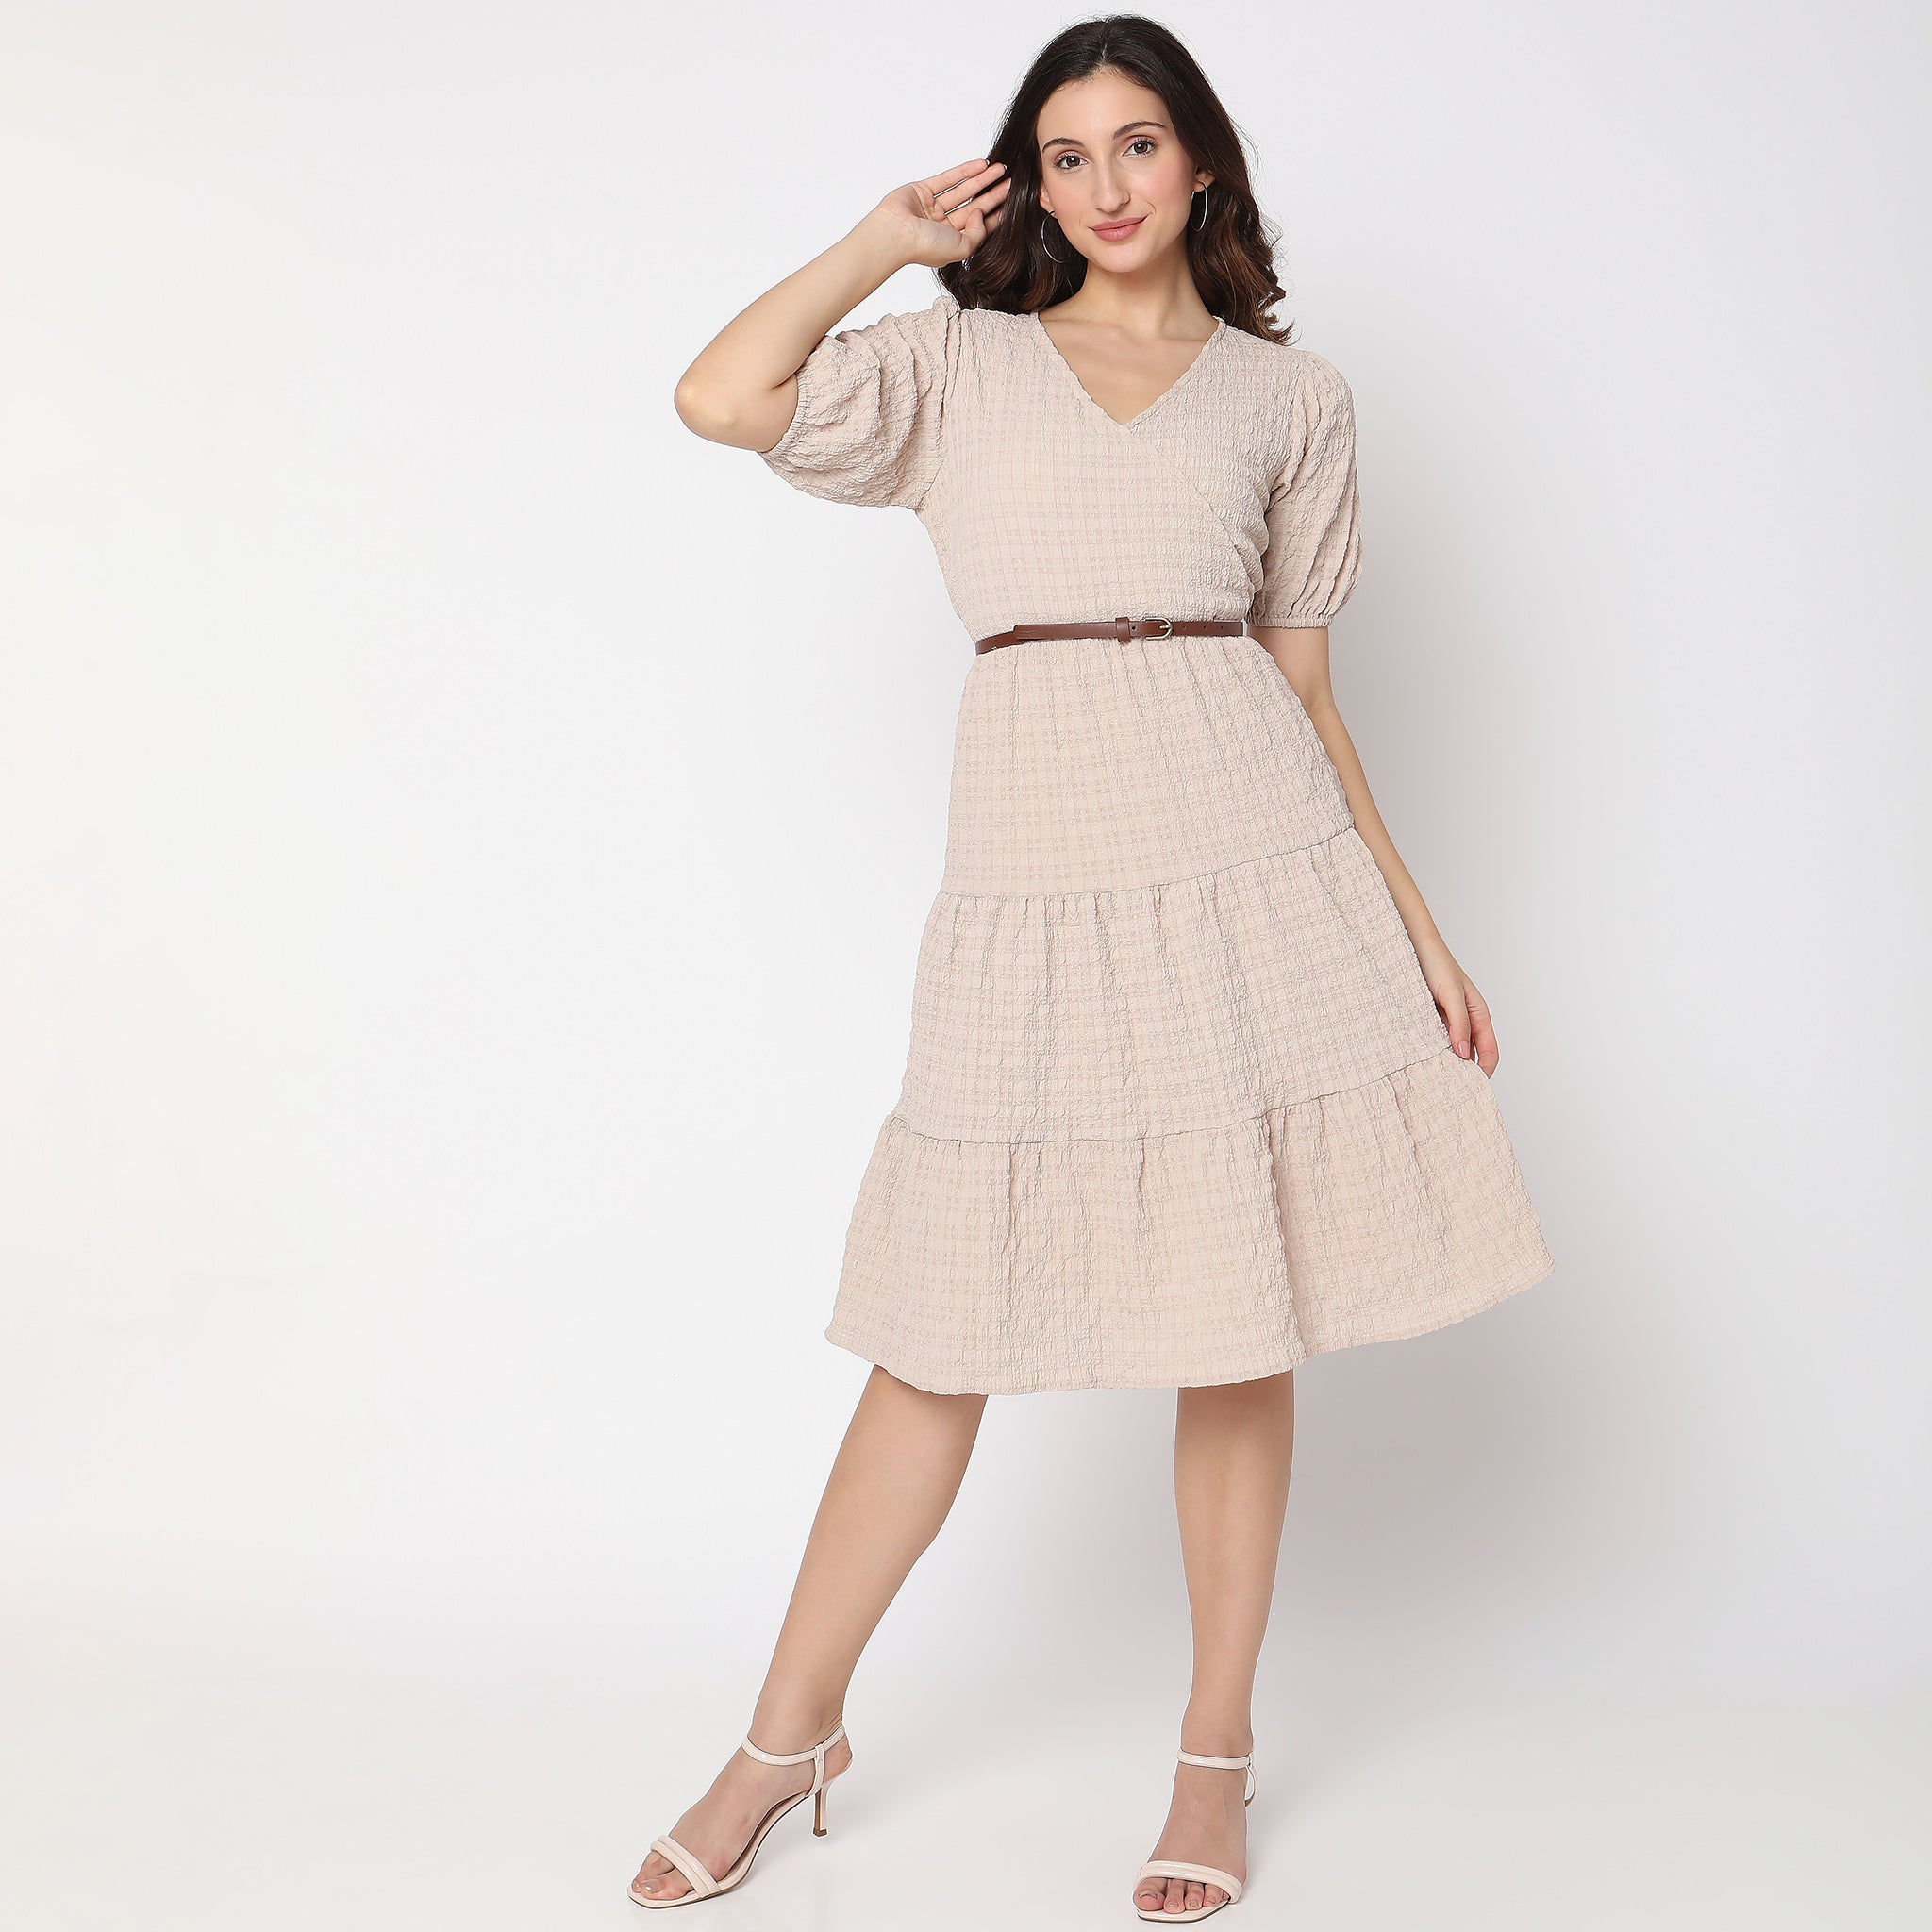 Amazon Put Thousands of Summer Dresses on Sale for Memorial Day